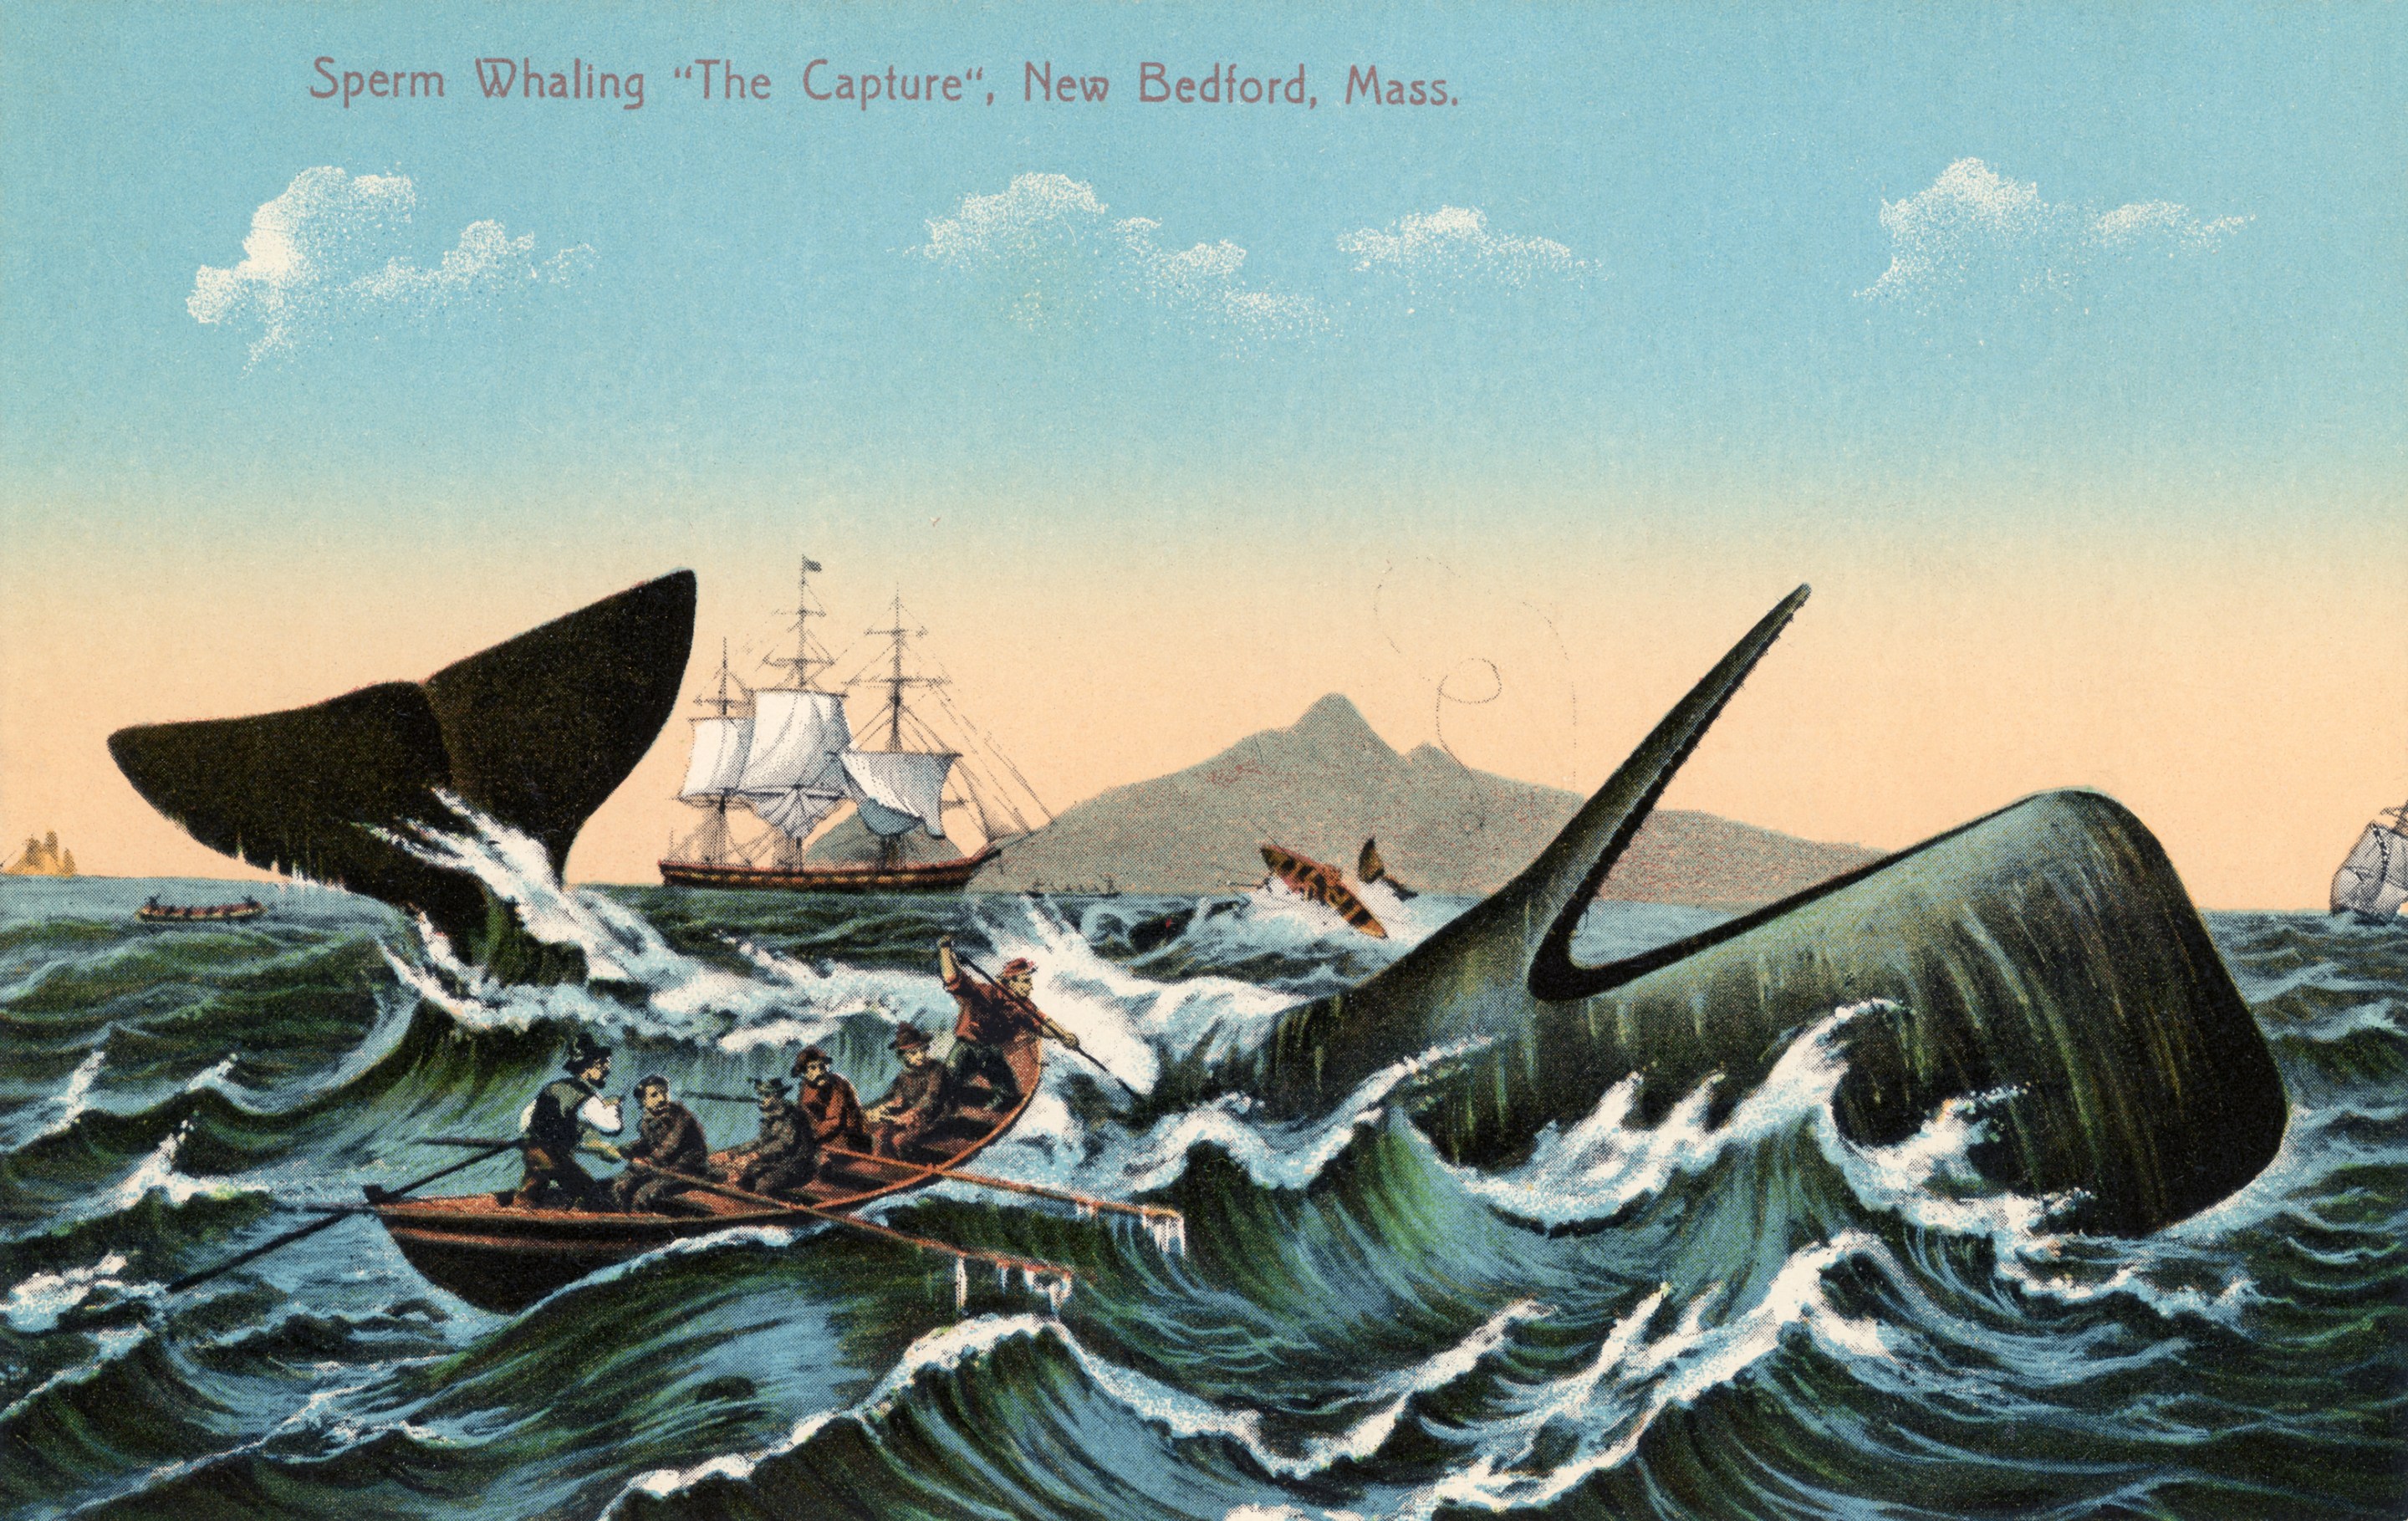 Antique print of whalers harpooning a sperm whale off New Bedford, Massachusetts. The print is from 1910.